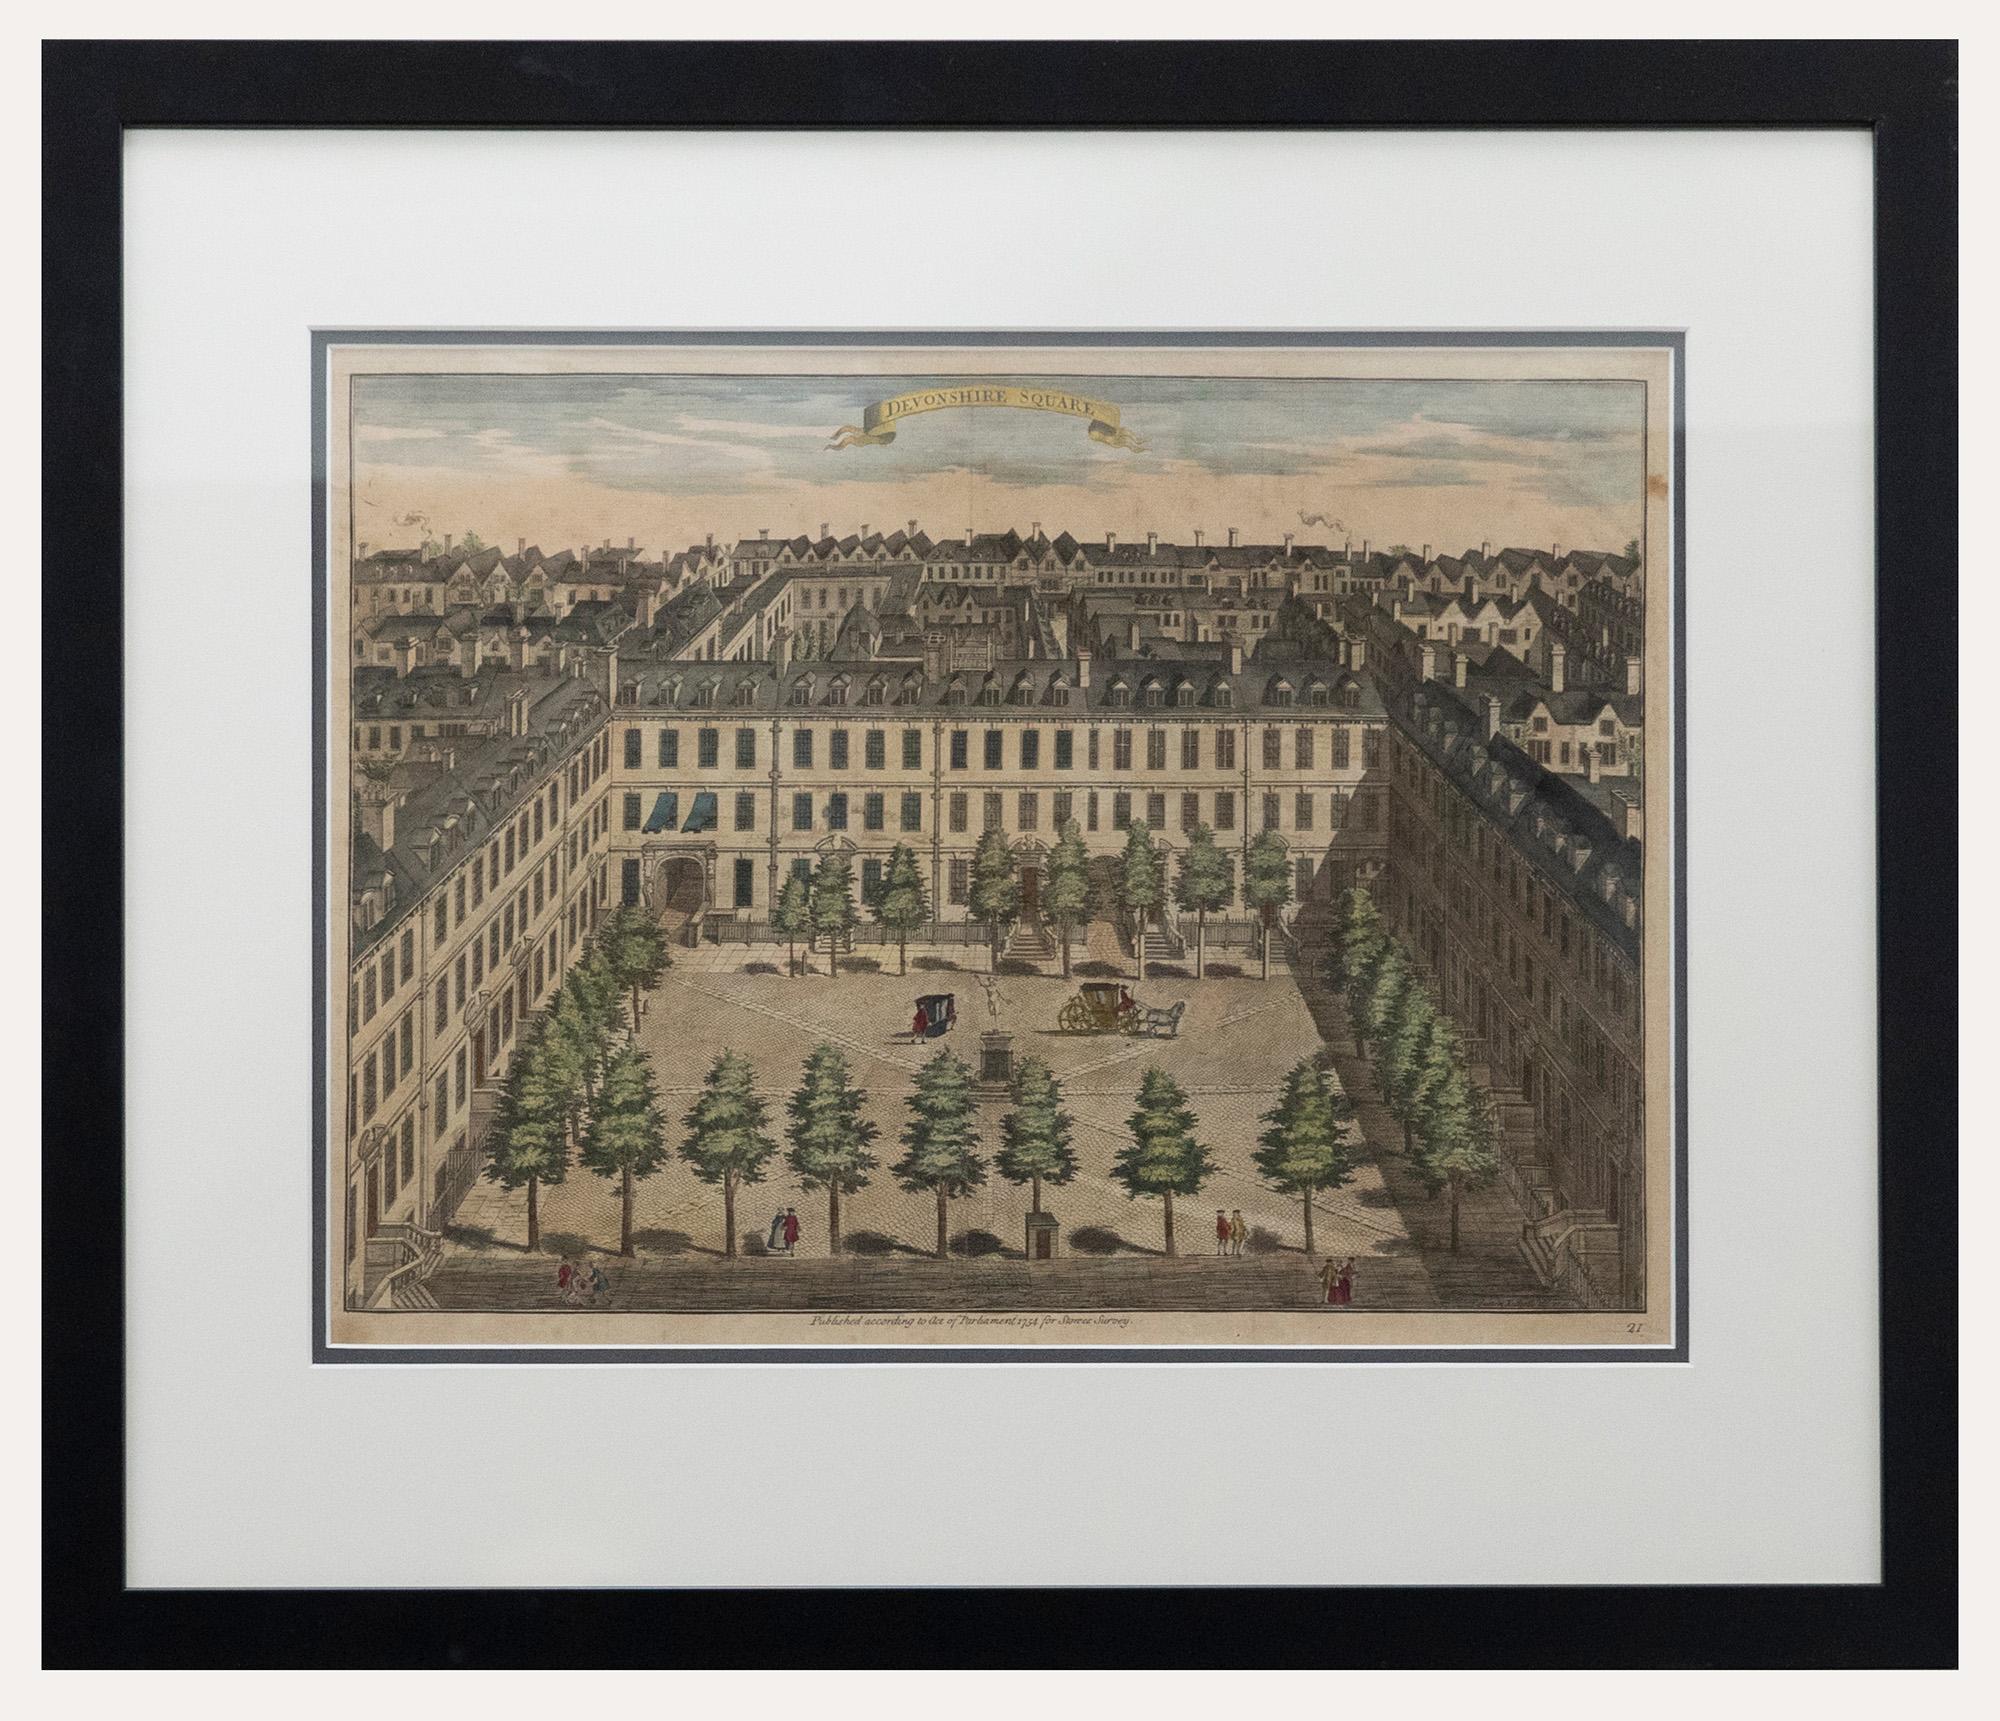 A bird's eye view of Devonshire Square, engraved by British master Sutton Nicholls. Published according to the act of Parliament in 1754 for Stow's Survey of London. This detailed engraving has been finished with hand colouring. Signed in plate to